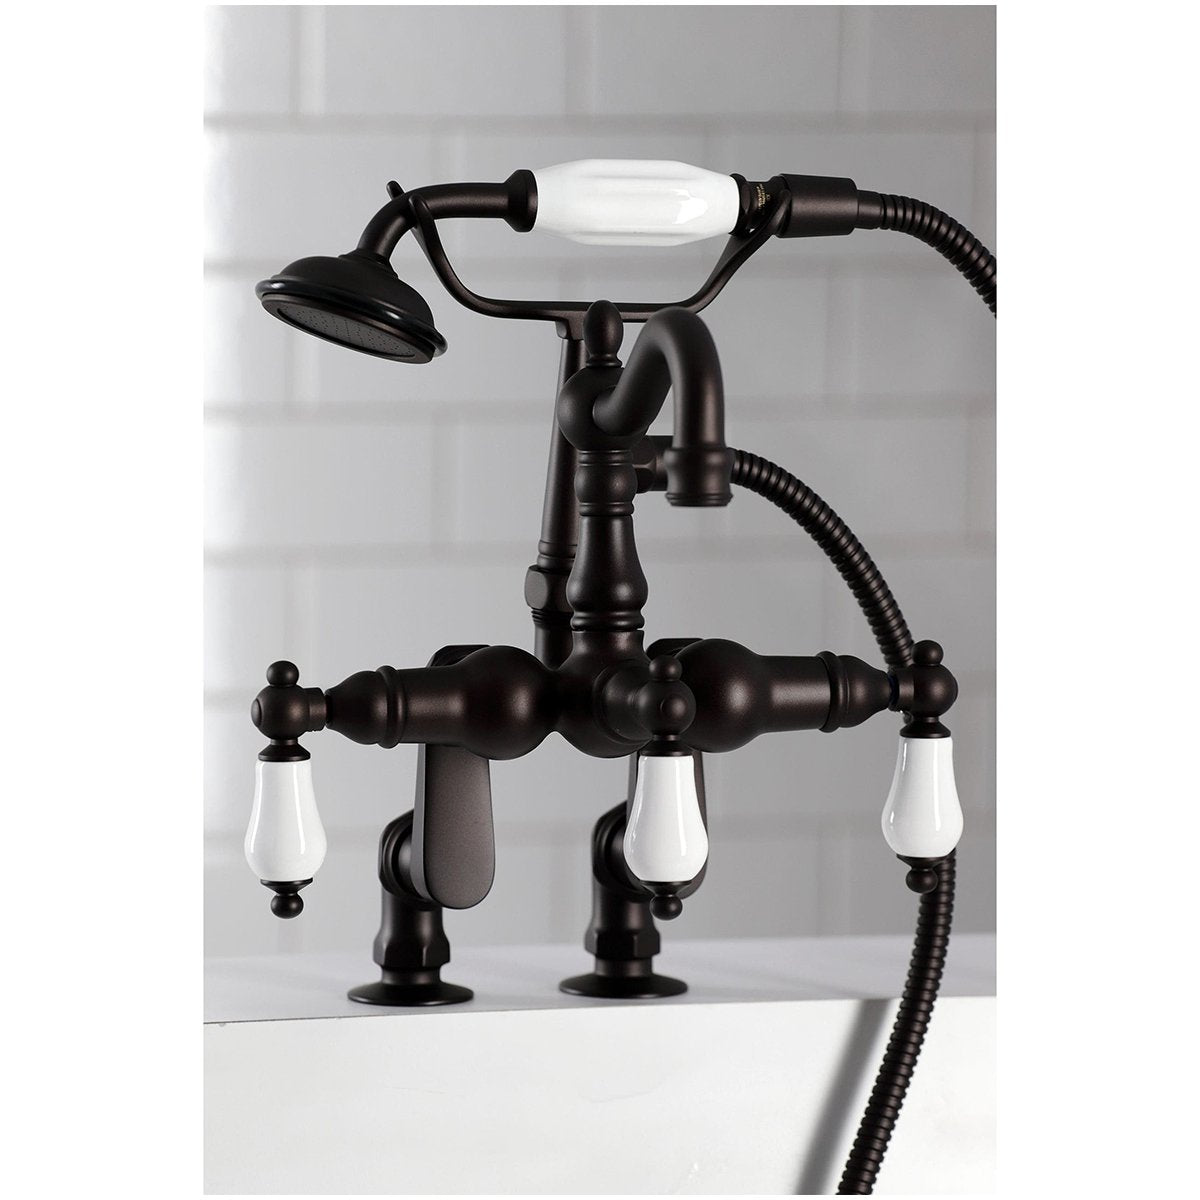 Kingston Brass CC6015TX-PVintage Clawfoot Tub Faucet with Hand Shower